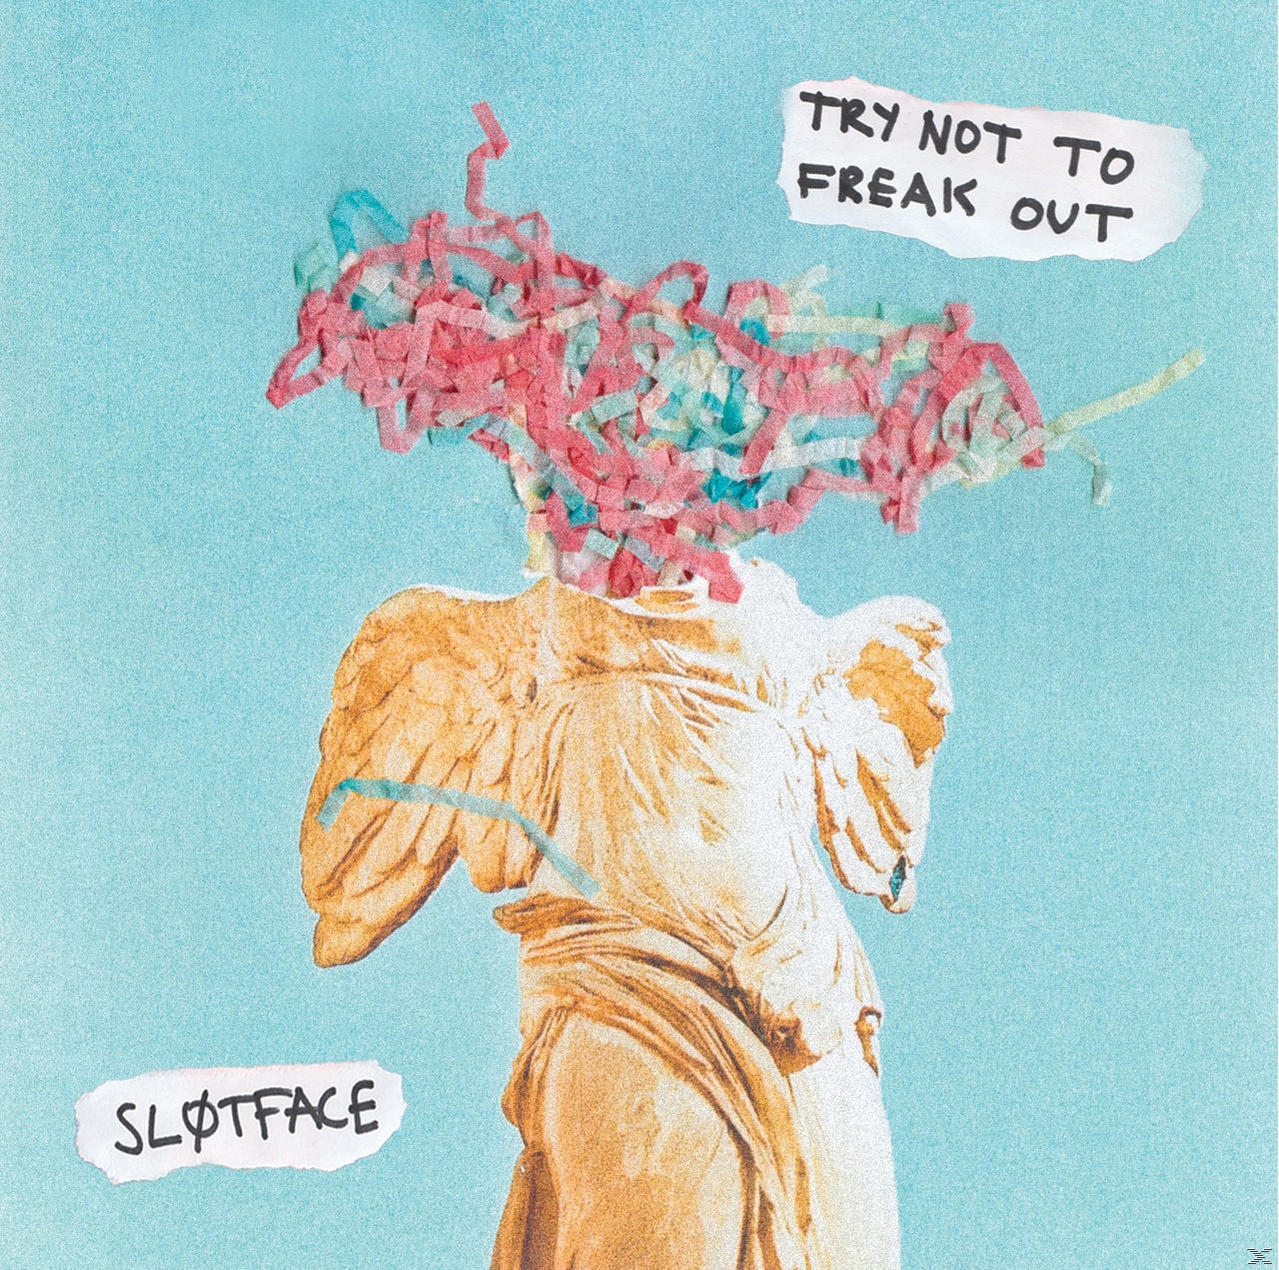 Slotface - TRY NOT OUT (CD) FREAK - TO